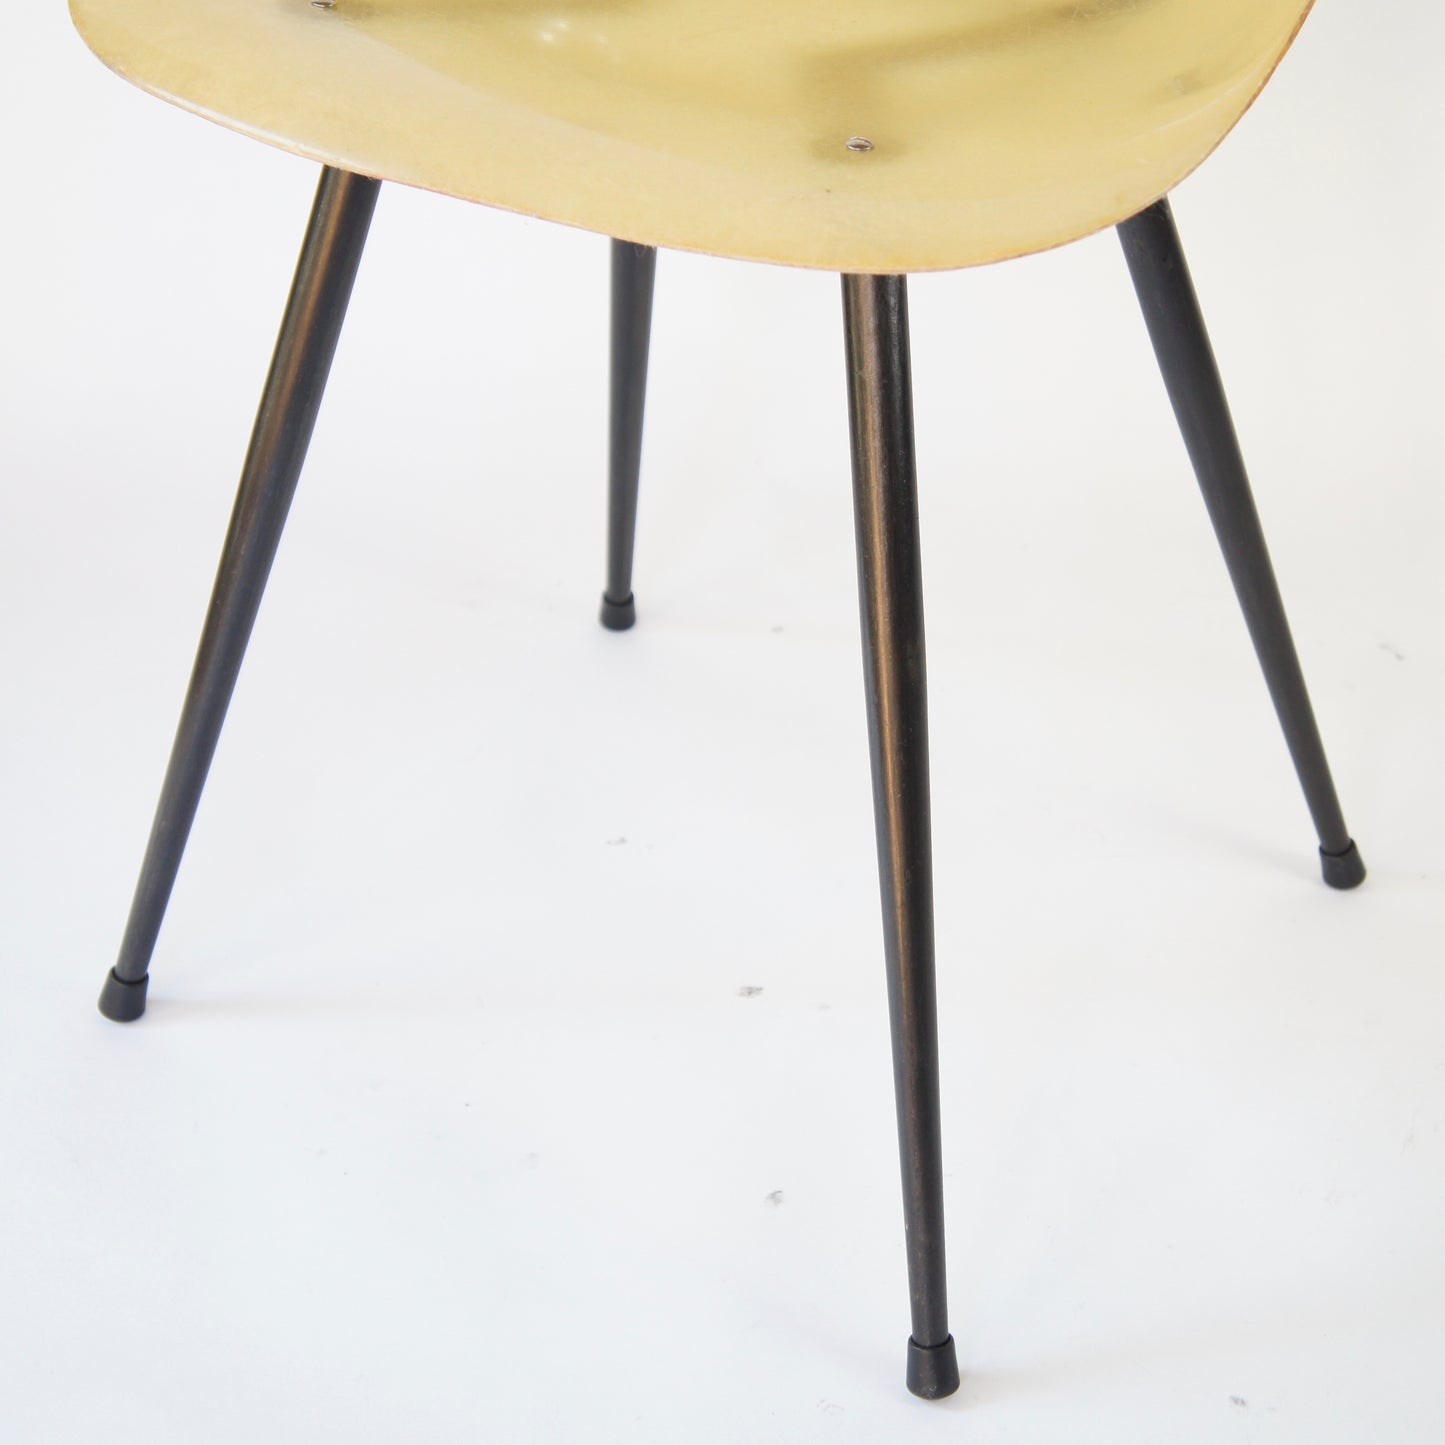 Coccinelle Chair - No.03